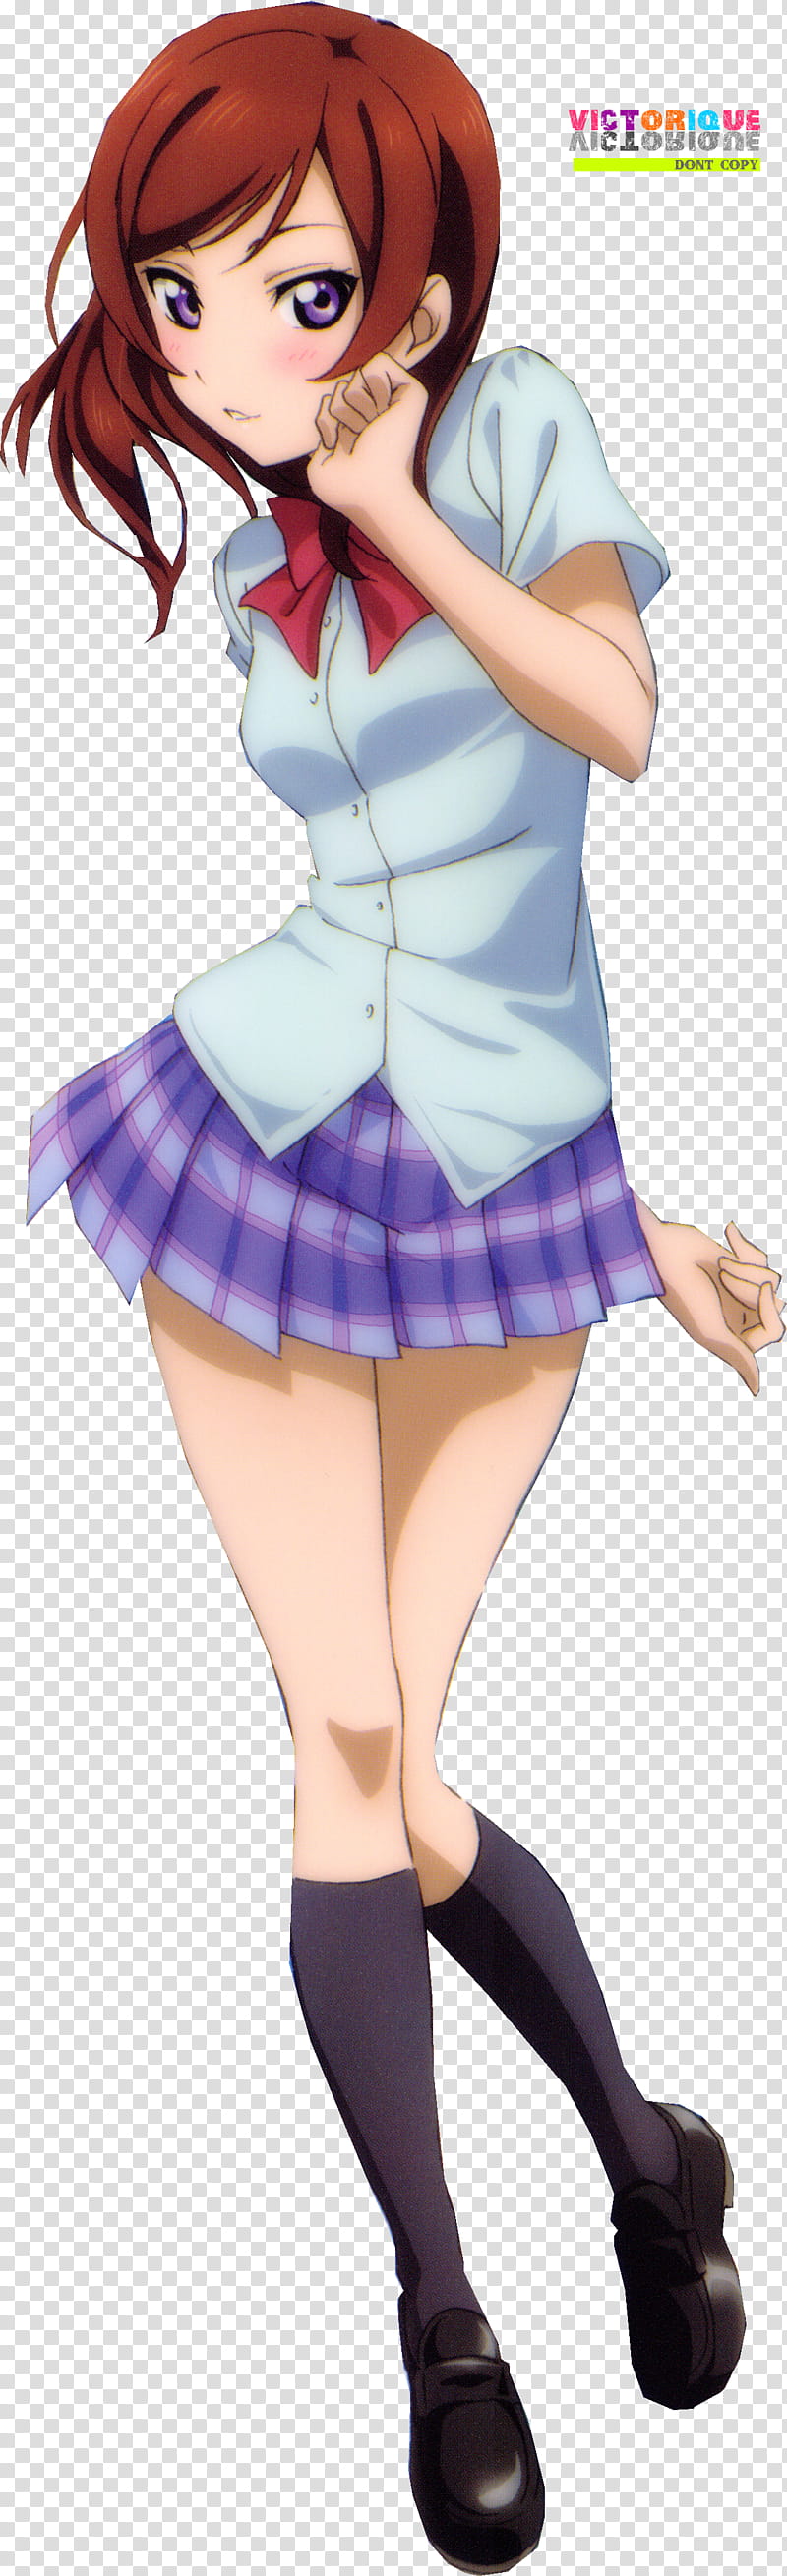 Love Live Anime Render, women's blue and white dress transparent background PNG clipart